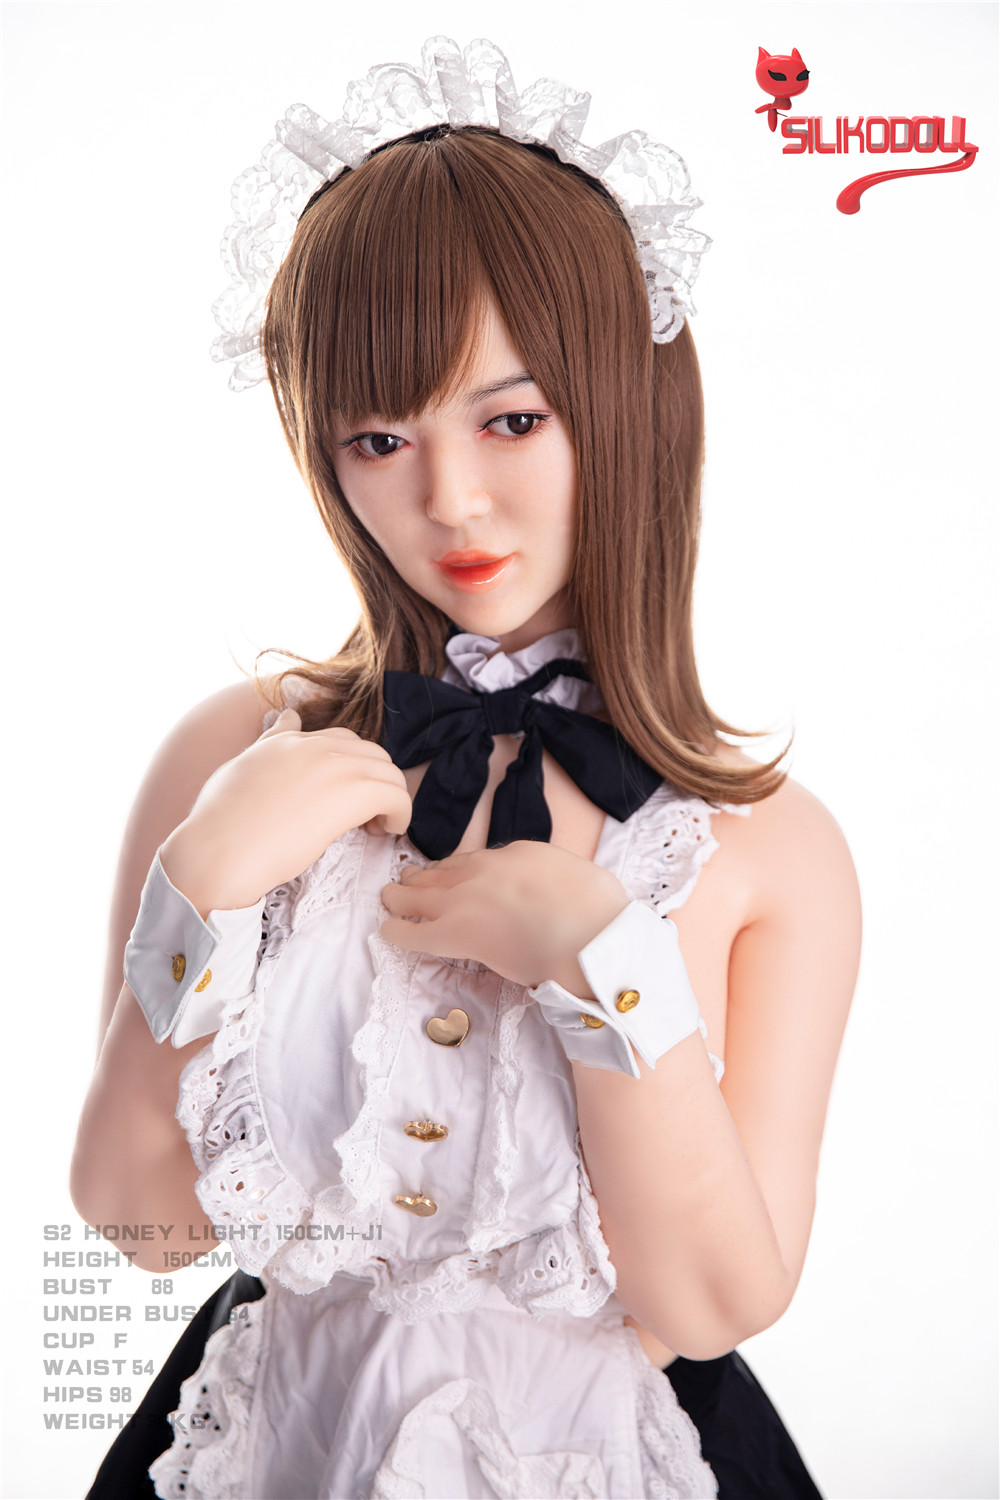 Siliko Doll Silicone Doll 150 cm(4.92 ft) Full Size Lifelike Sex Doll F Cup with #J1 Head